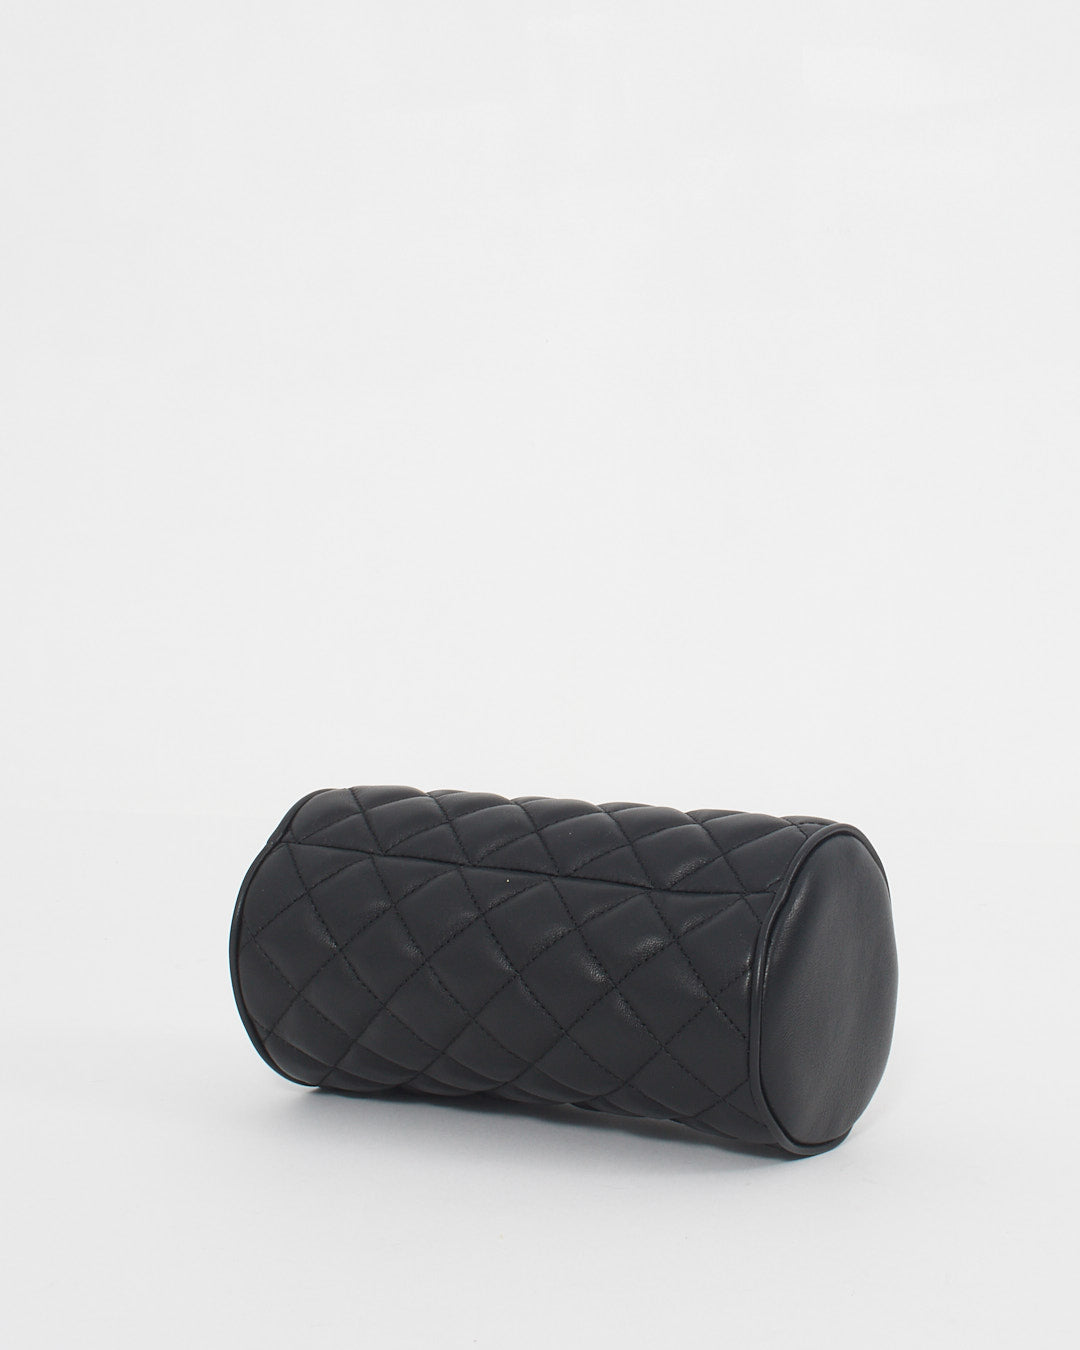 Versace Black Quilted Leather Medusa Head Cylinder Pouch